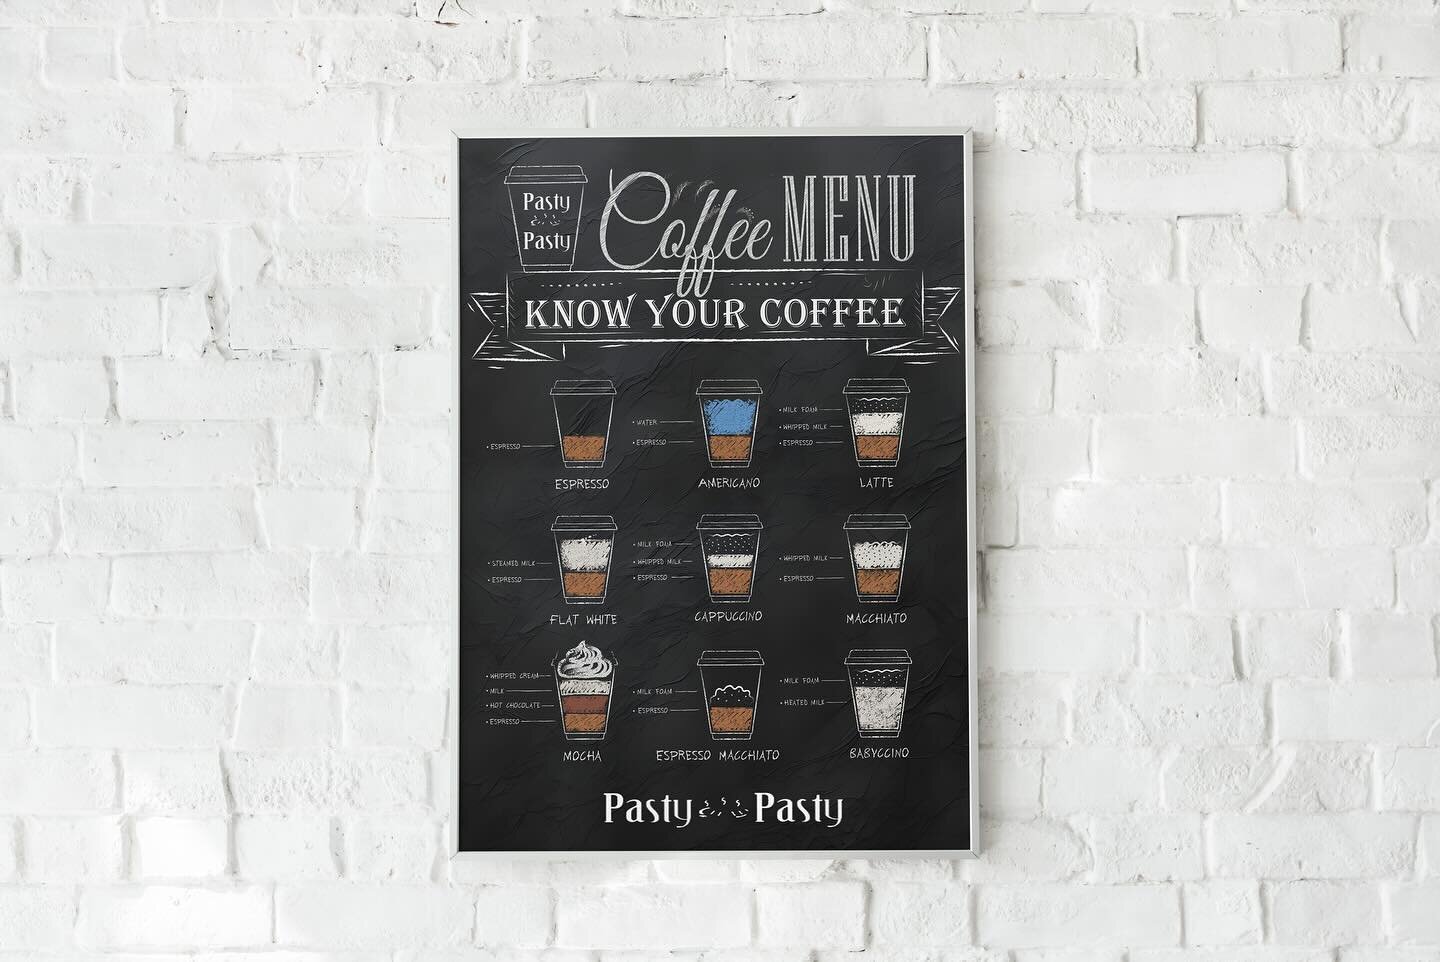 Pasty Pasty Coffee Menu Poster!

Our design process was centered on clarity and brand consistency. We employed a clean, structured layout that allowed for easy navigation of coffee options. The takeaway cup graphics served a dual purpose&mdash;resona